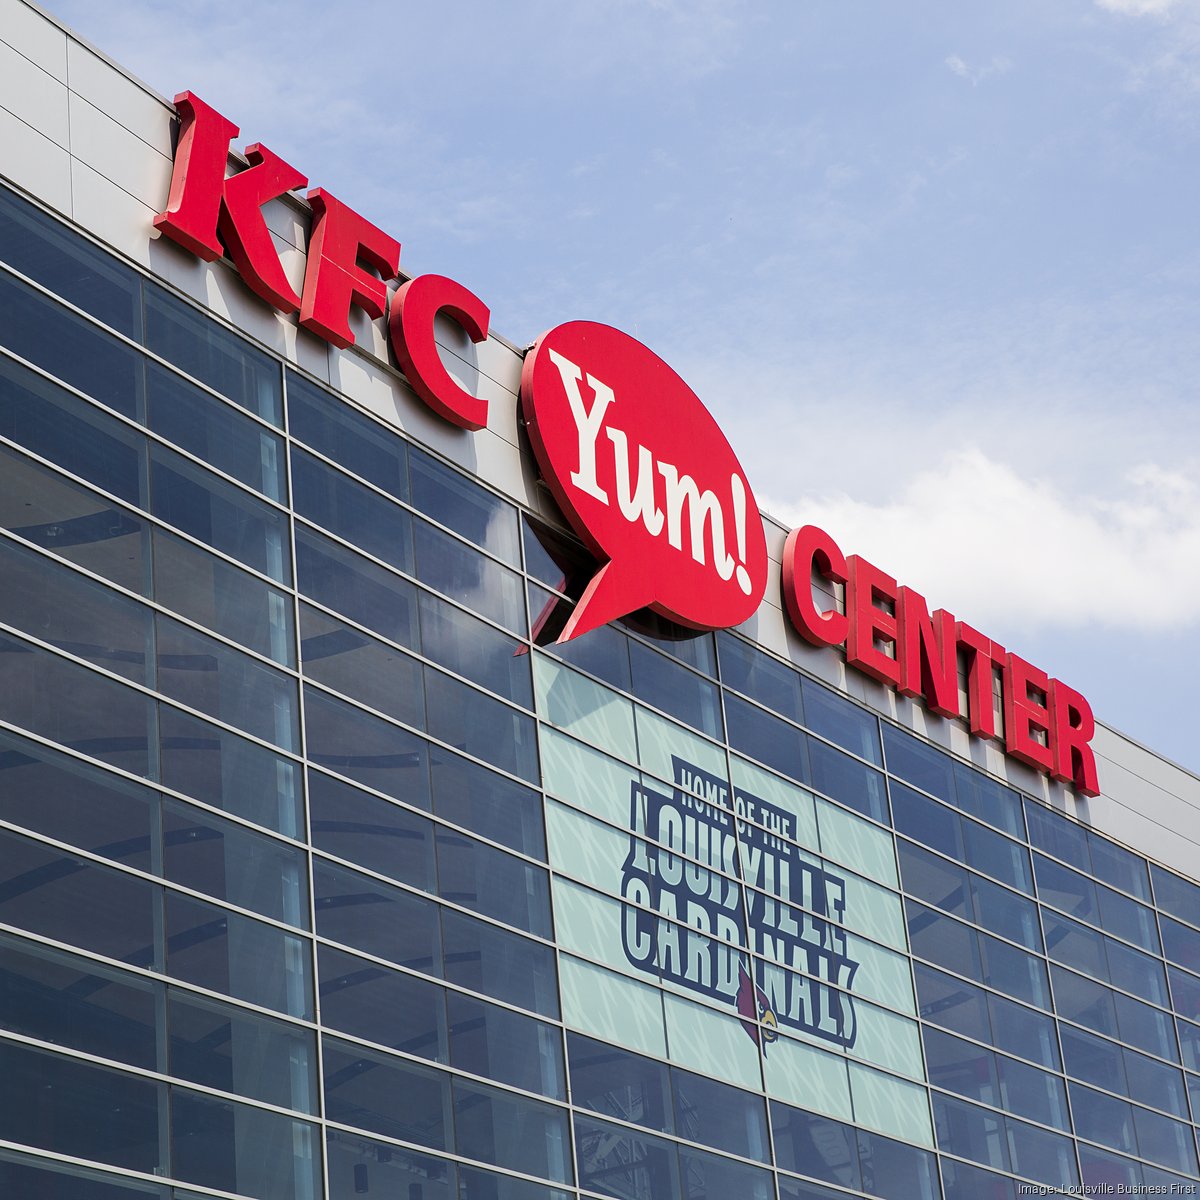 KFC Yum! Center keeps its name through 2031 under deal extension